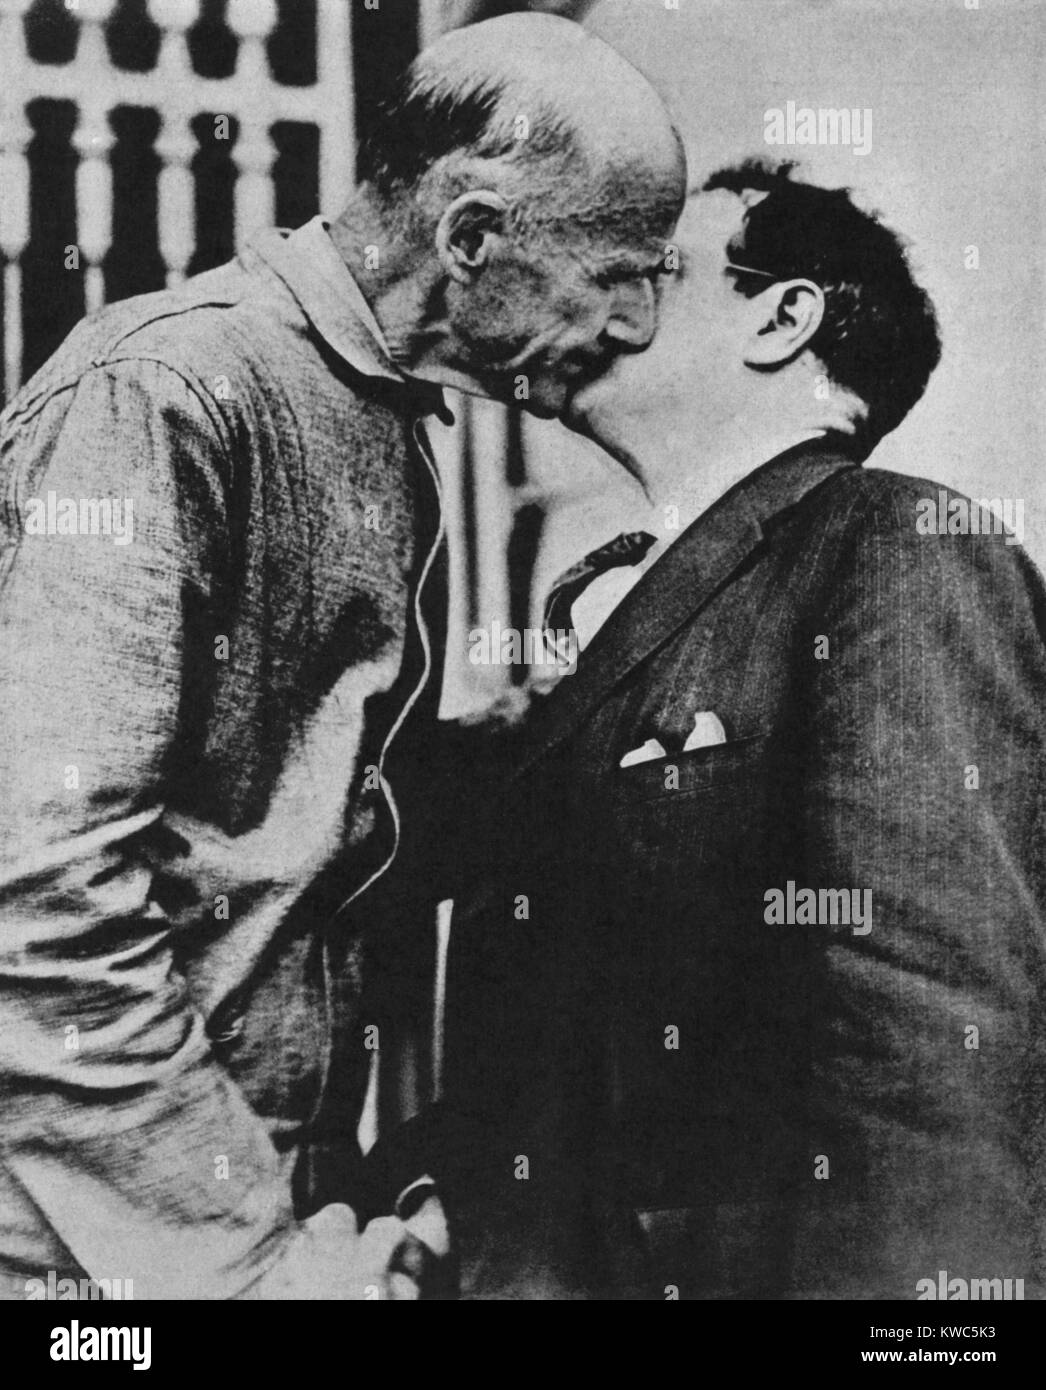 Seymour Stedman, and Eugene Debs shake hands and kiss at Atlanta Federal Penitentiary, 1920. Stedman notified Debs of his nomination as the Socialist Party's nominee for President, for which he ran from jail and won almost one million of 27 million votes cast. Leftist Labor Leader and Socialist politician Eugene Debs was serving a 10-year sentence for publicly opposing U.S. entry into World War 1. (BSLOC 2015 15 183) Stock Photo